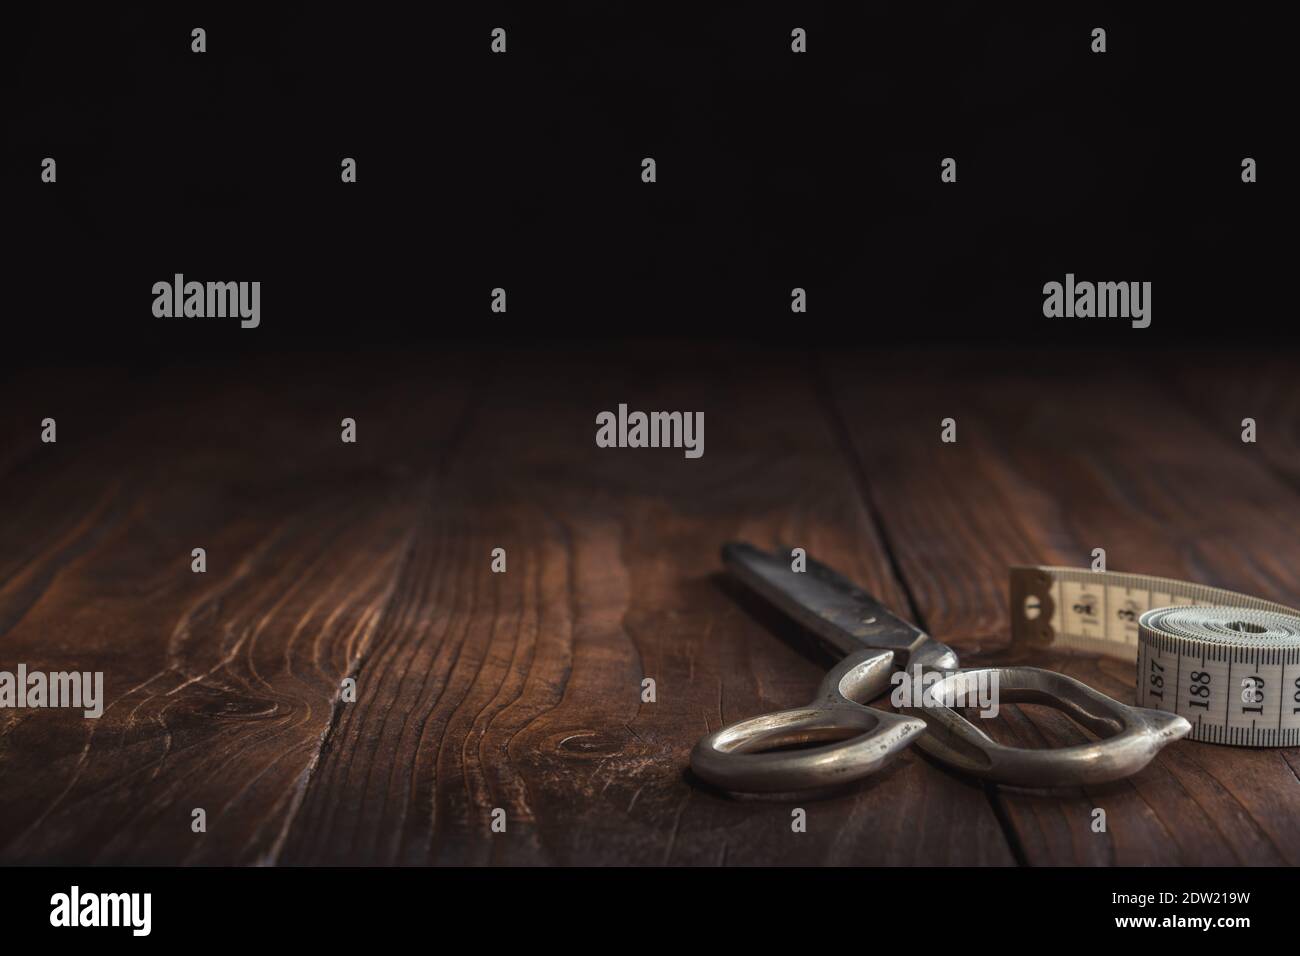 Sewing items - tailoring scissors and measuring tape on dark wooden table. Copy space for text. Stock Photo